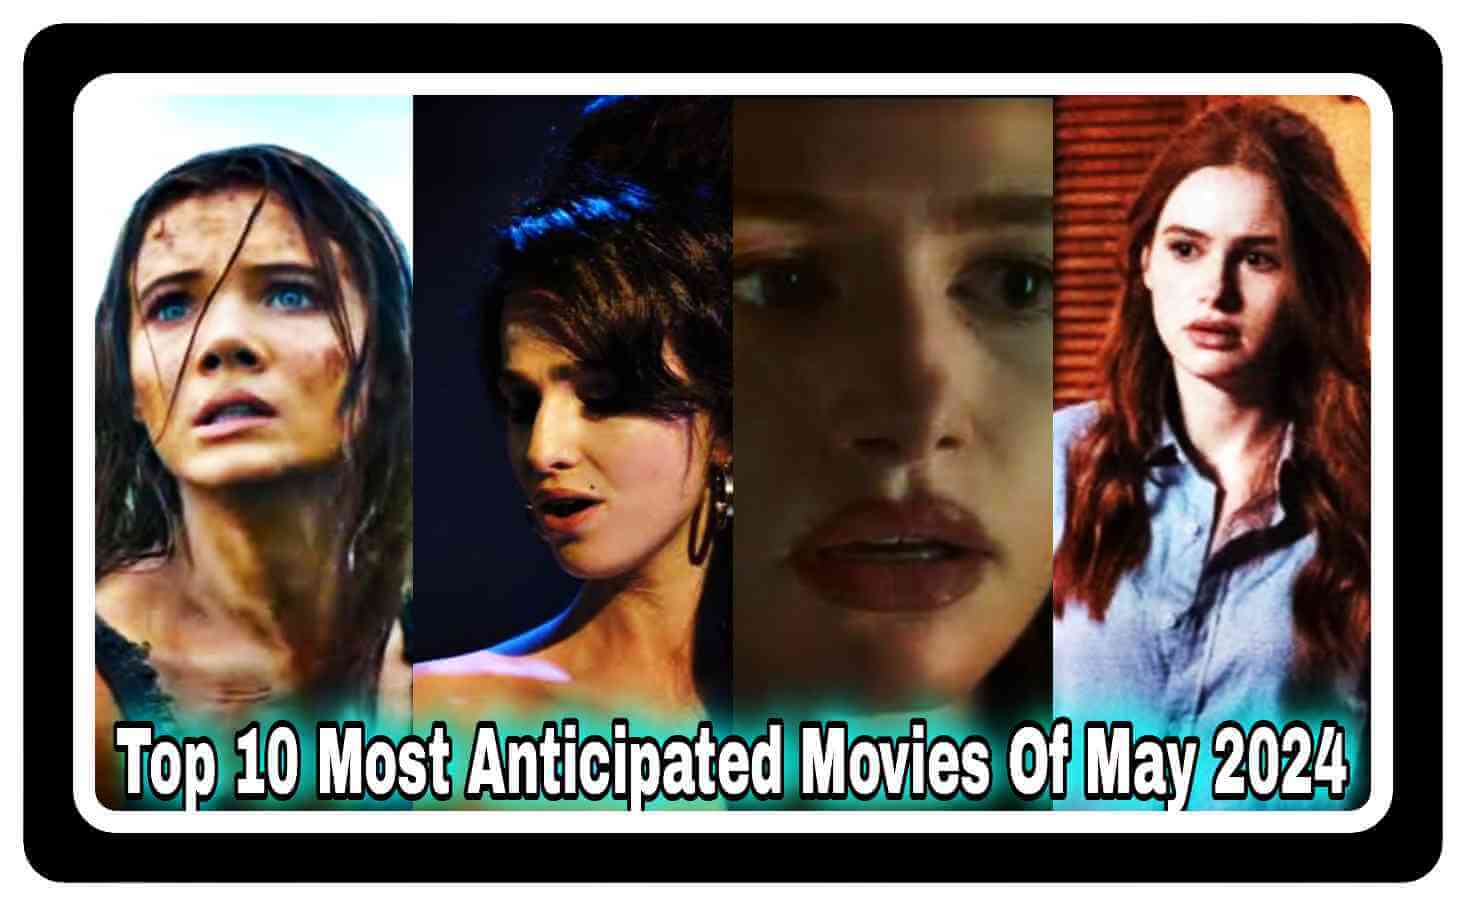 Top 10 Most Anticipated Movies Of May 2024